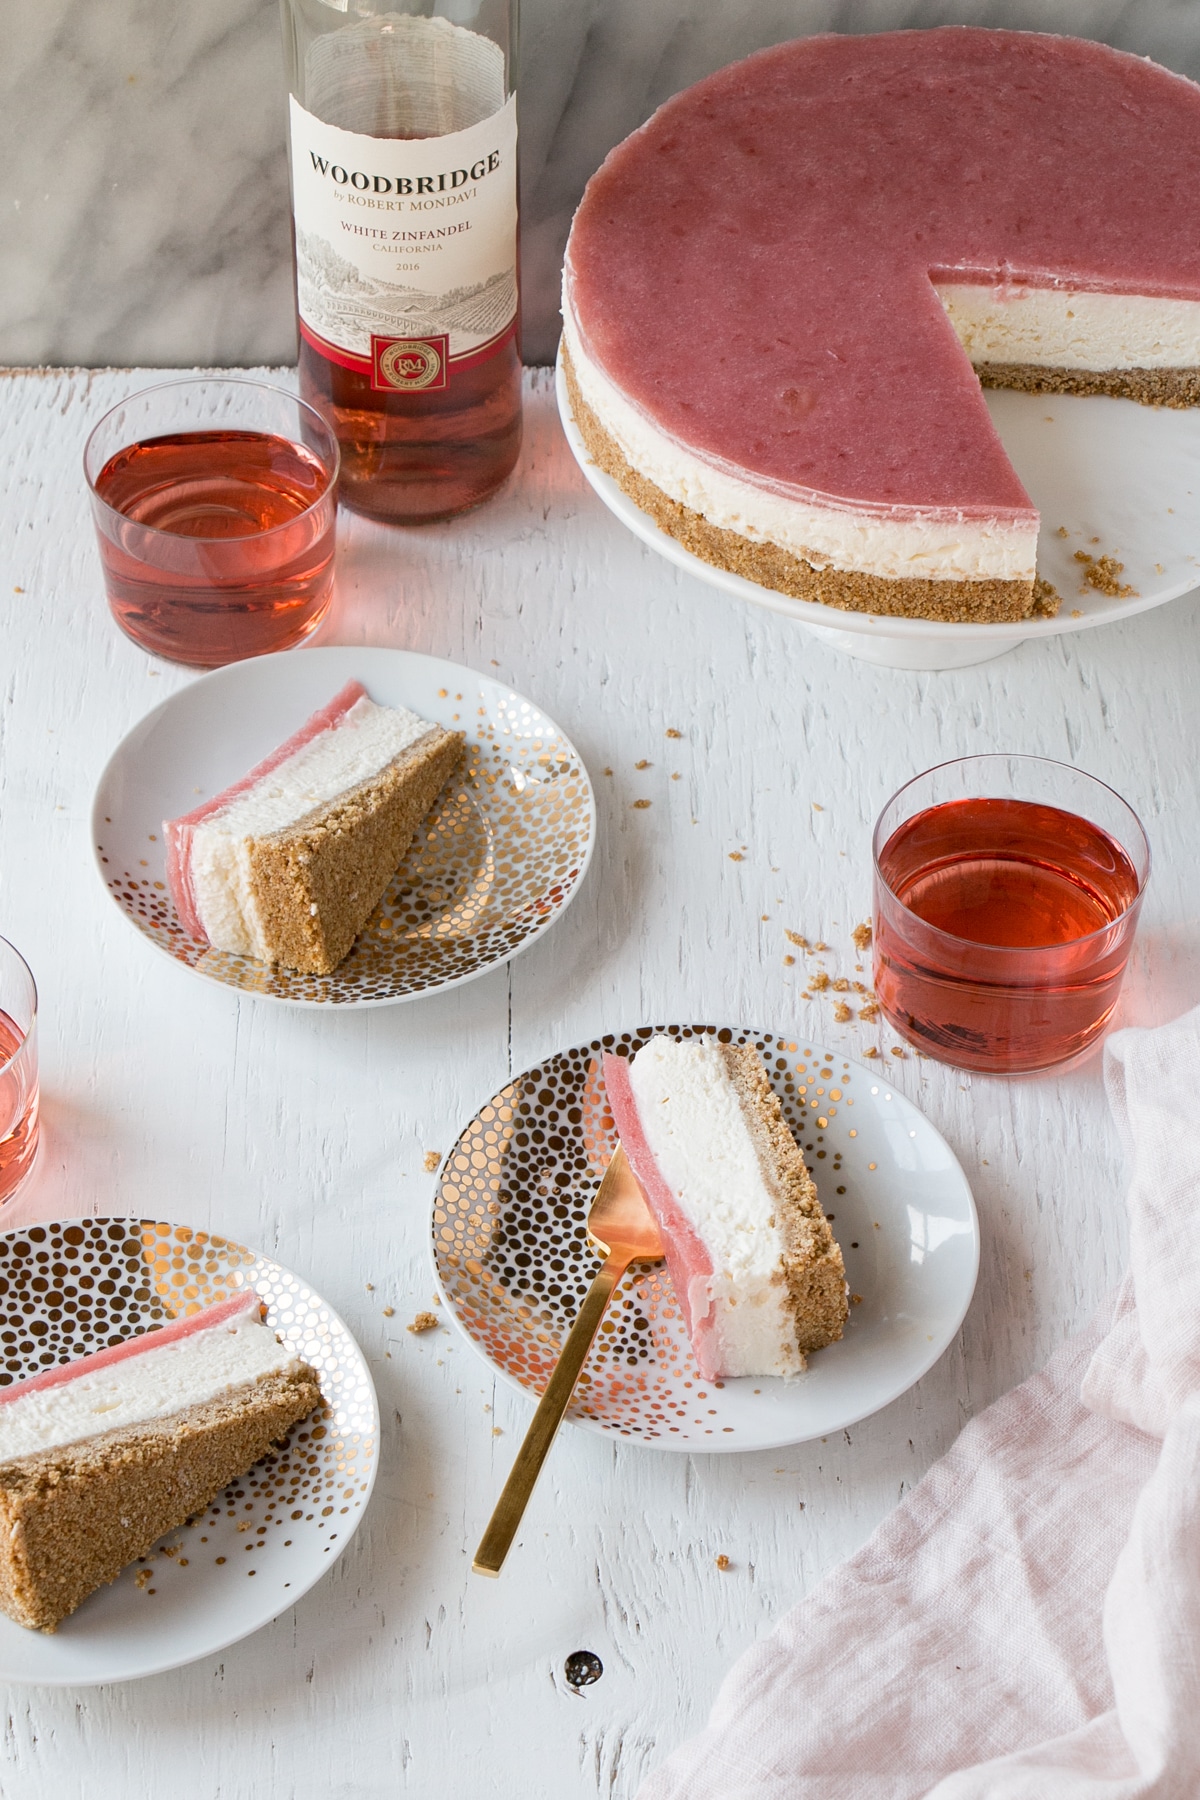 Slices of a No Bake Rhubarb Cheesecake on plates and glasses of rose wine.